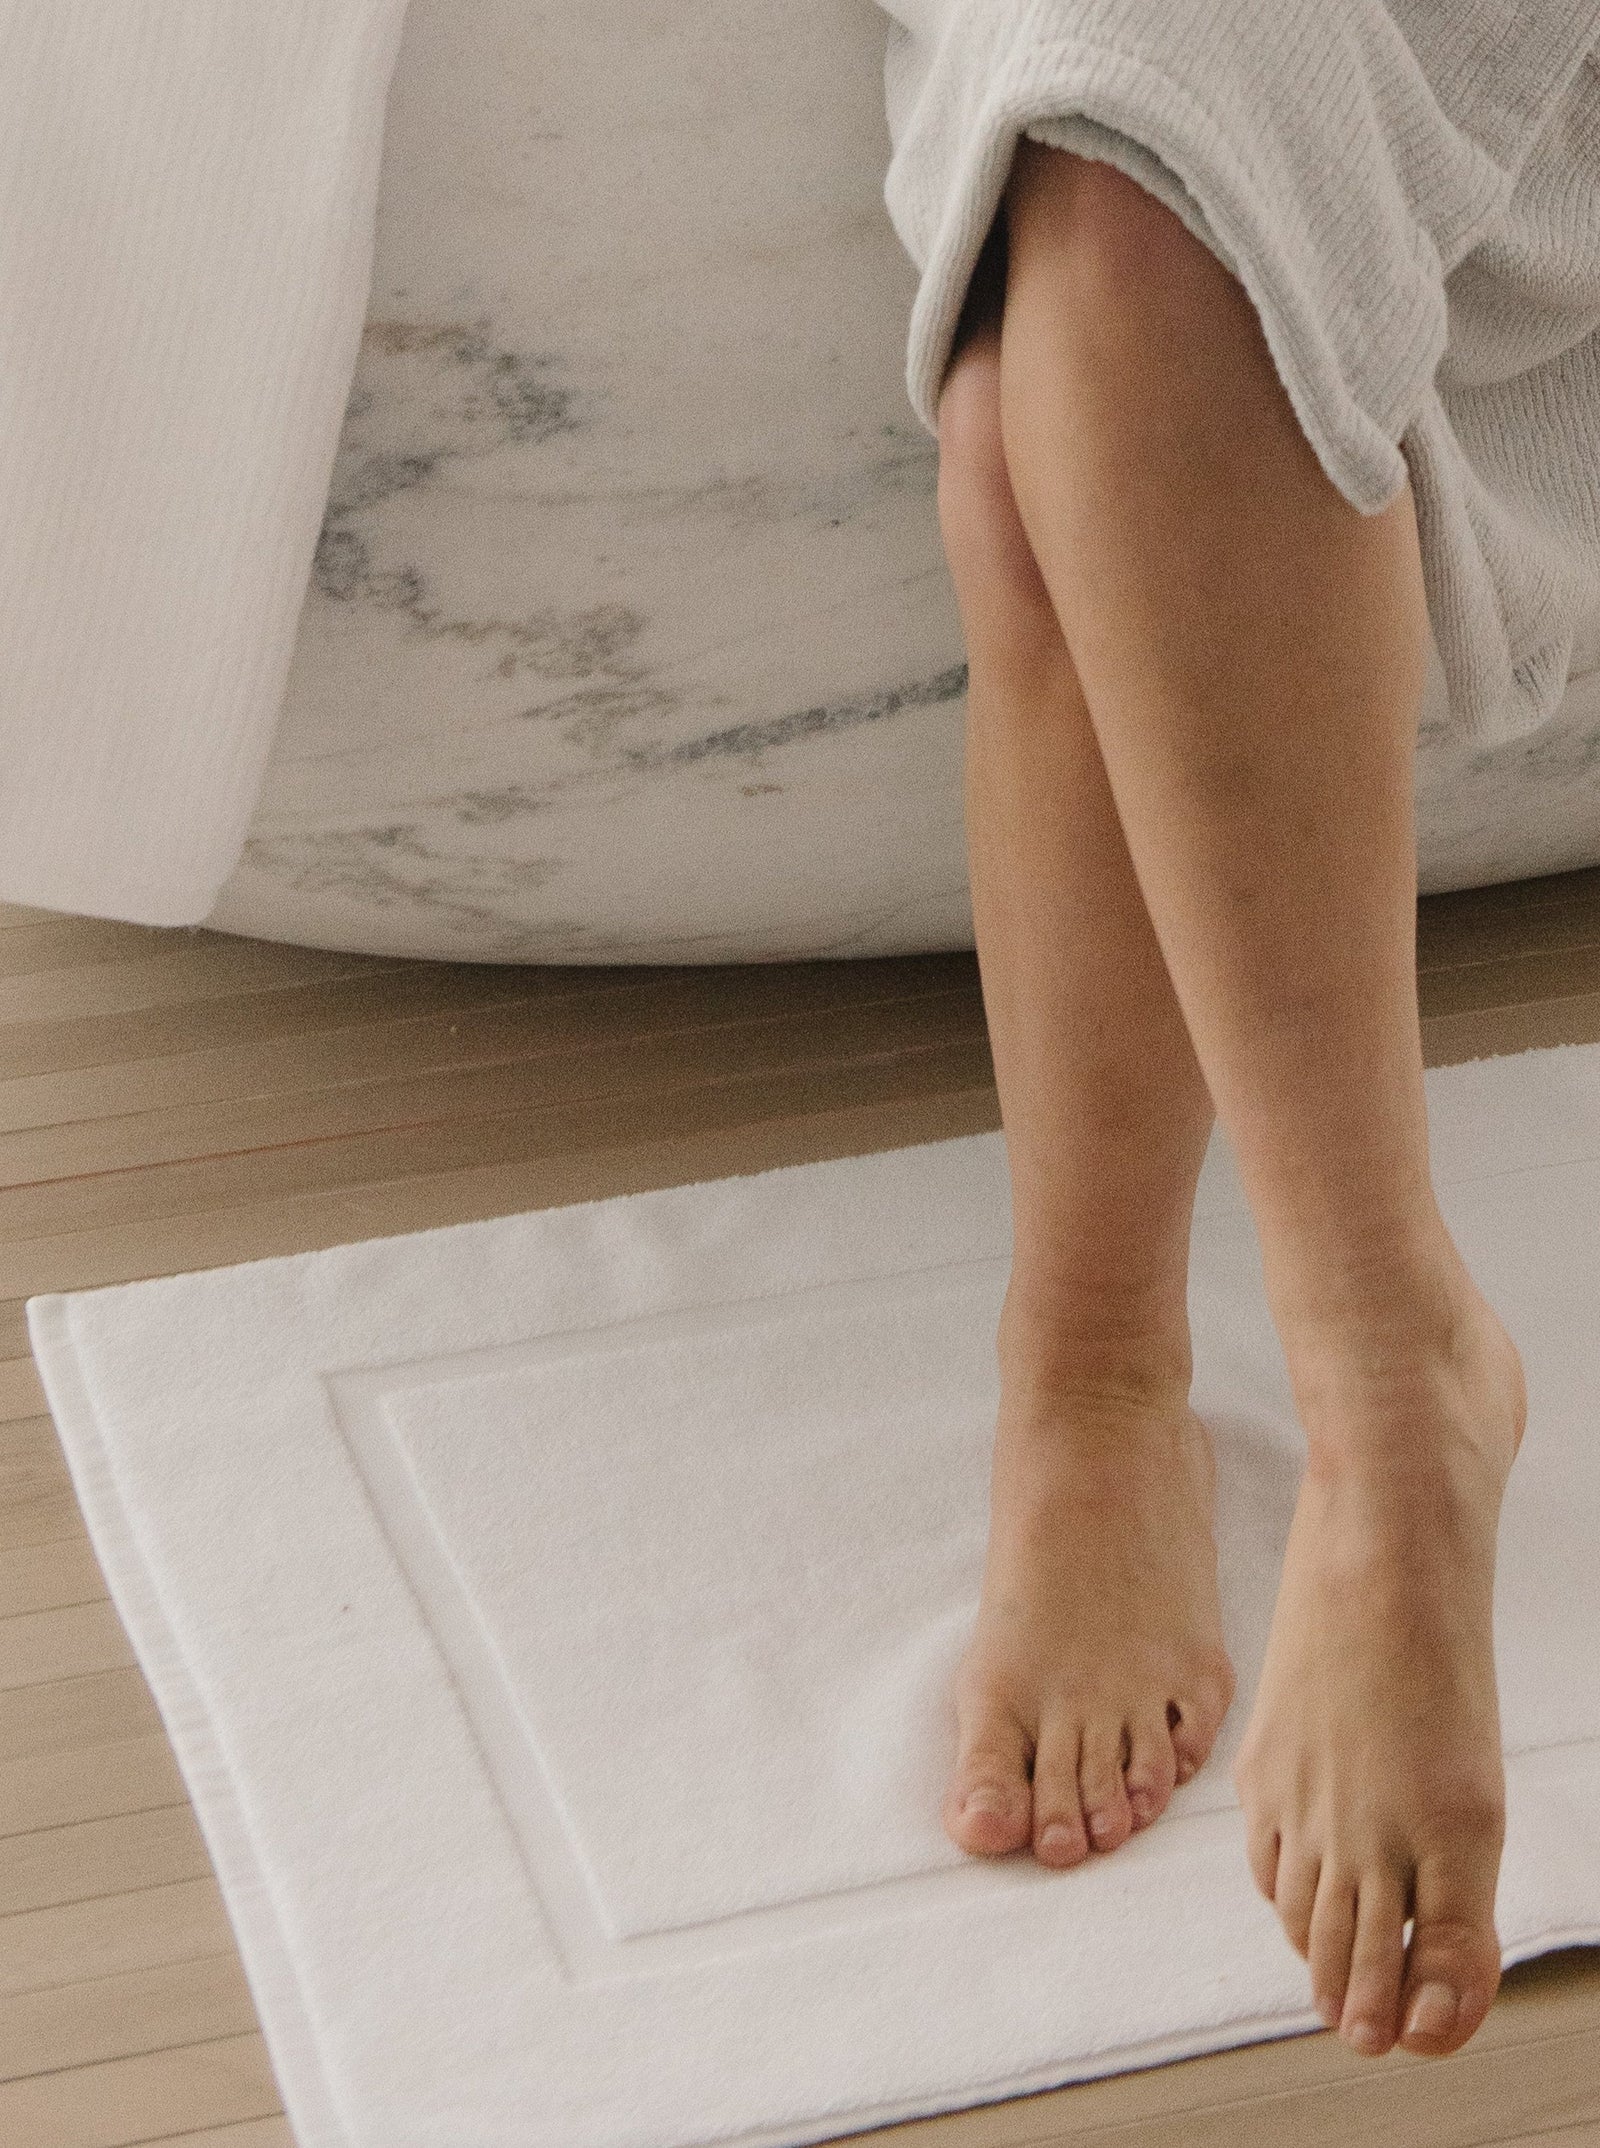 White Premium Plush Bath Mat resting on floor next to bathtub. The photo was taken in a bathroom showing a persons feet resting on the bath mat.